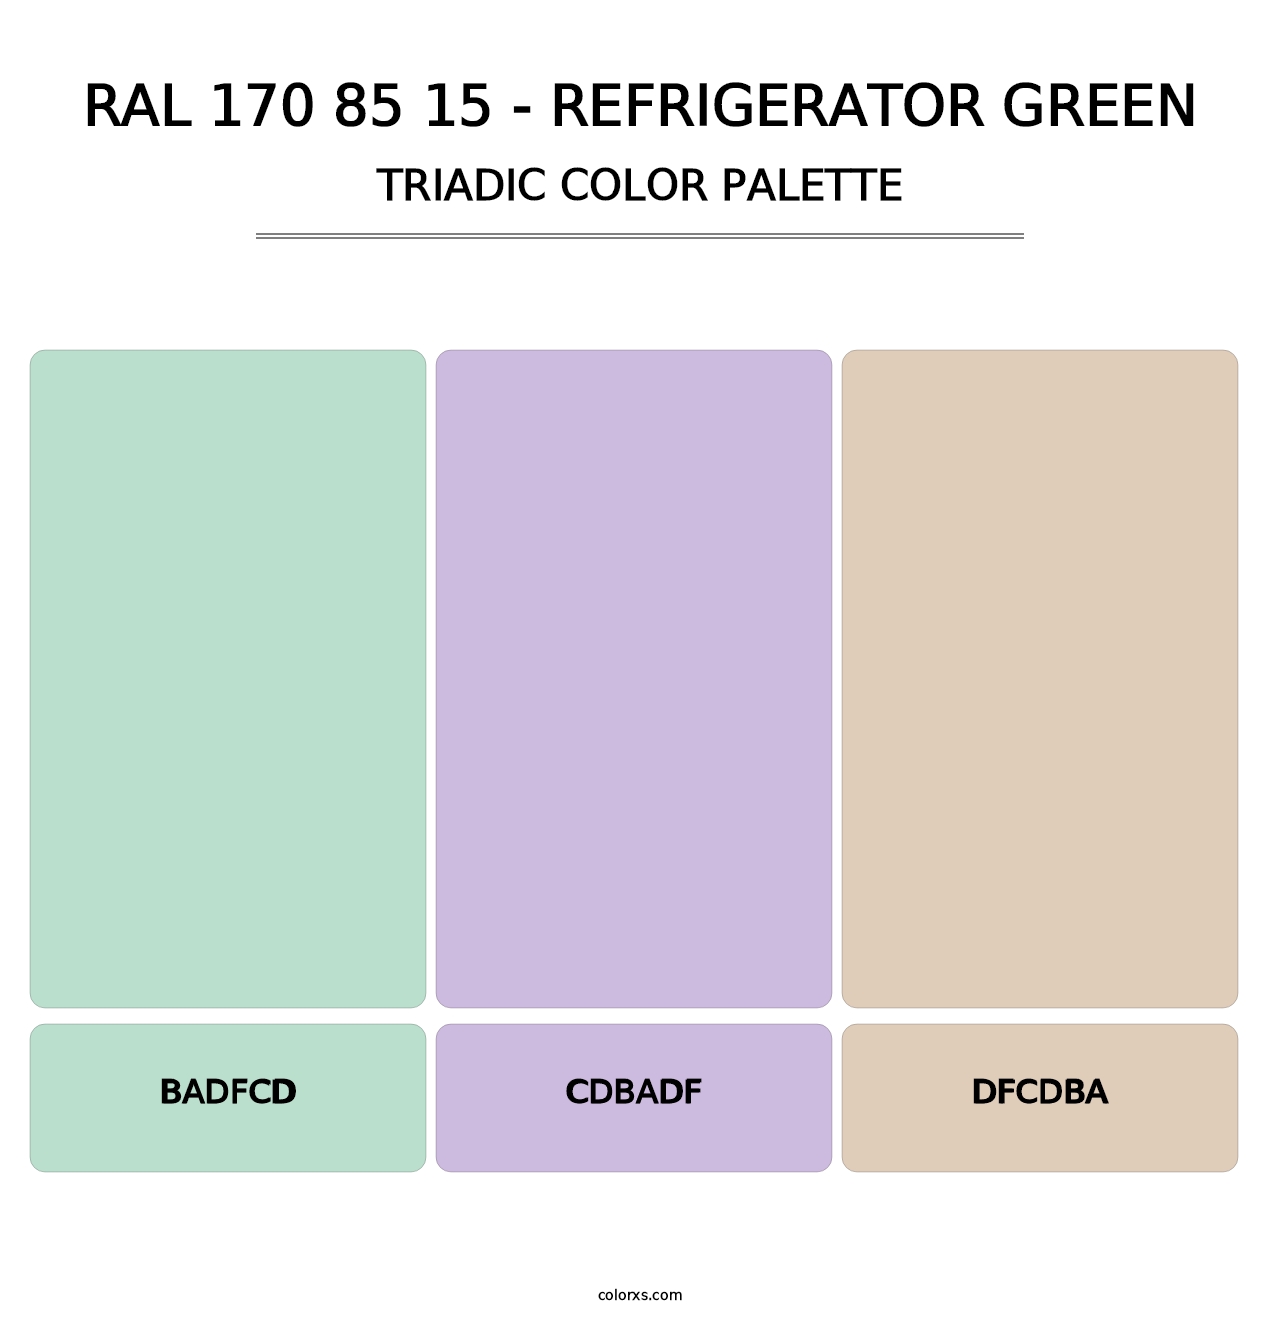 RAL 170 85 15 - Refrigerator Green - Triadic Color Palette